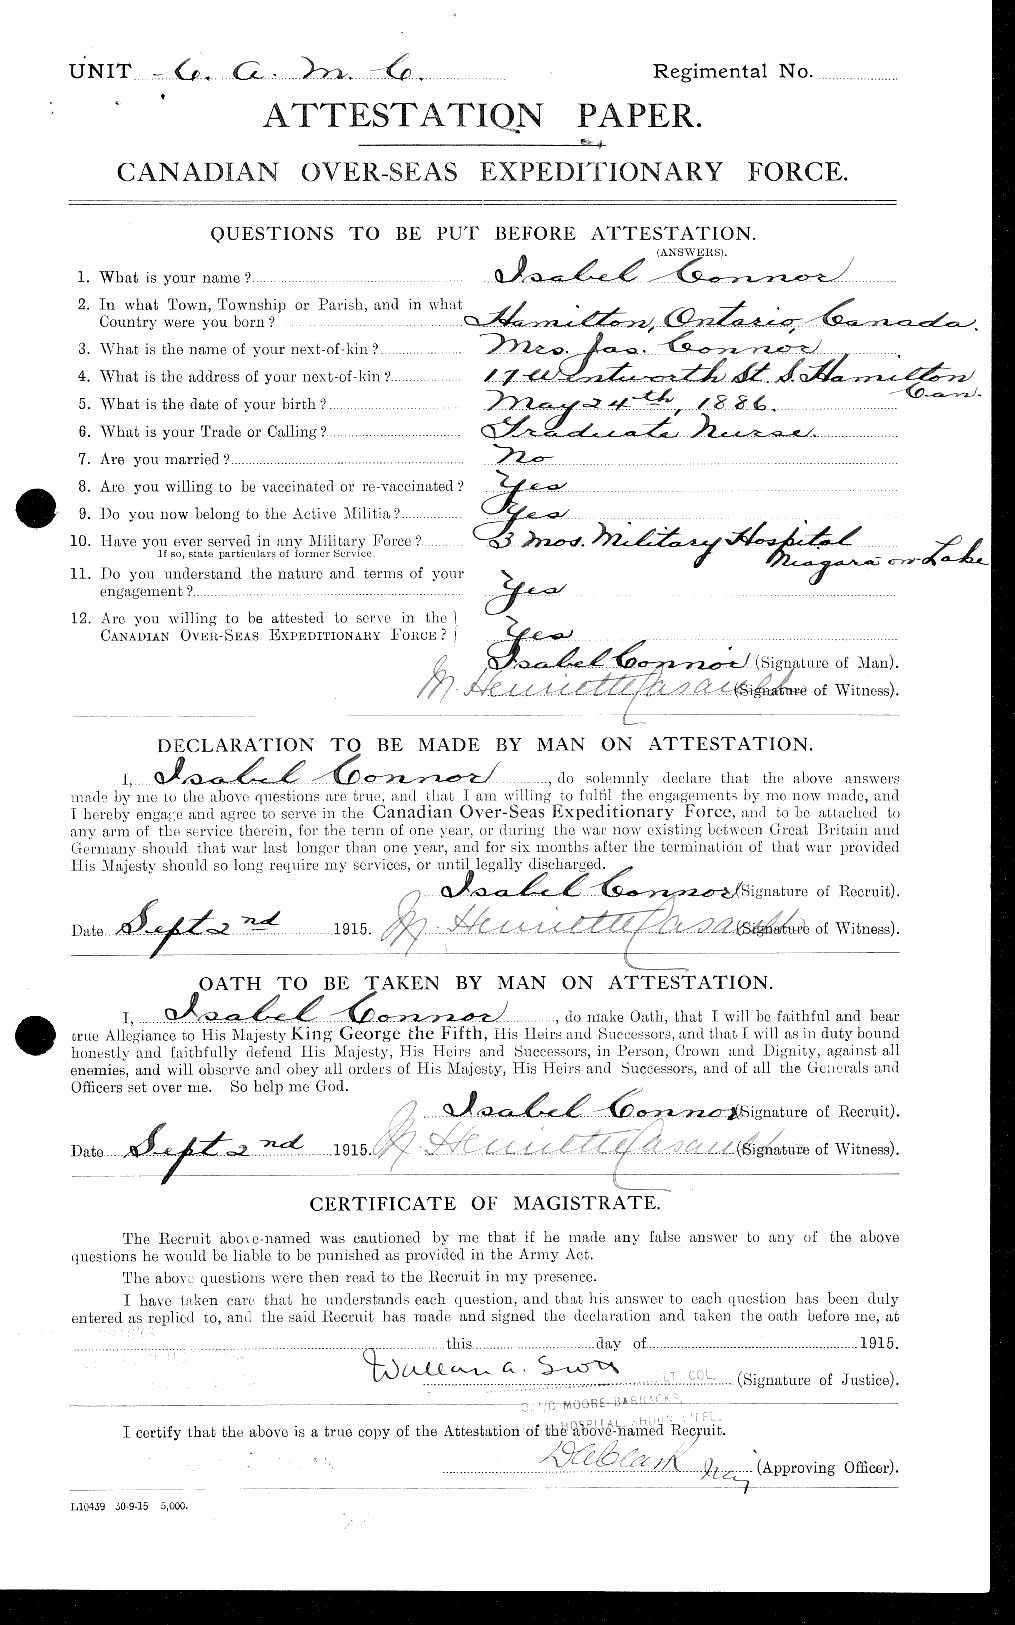 Personnel Records of the First World War - CEF 038316a